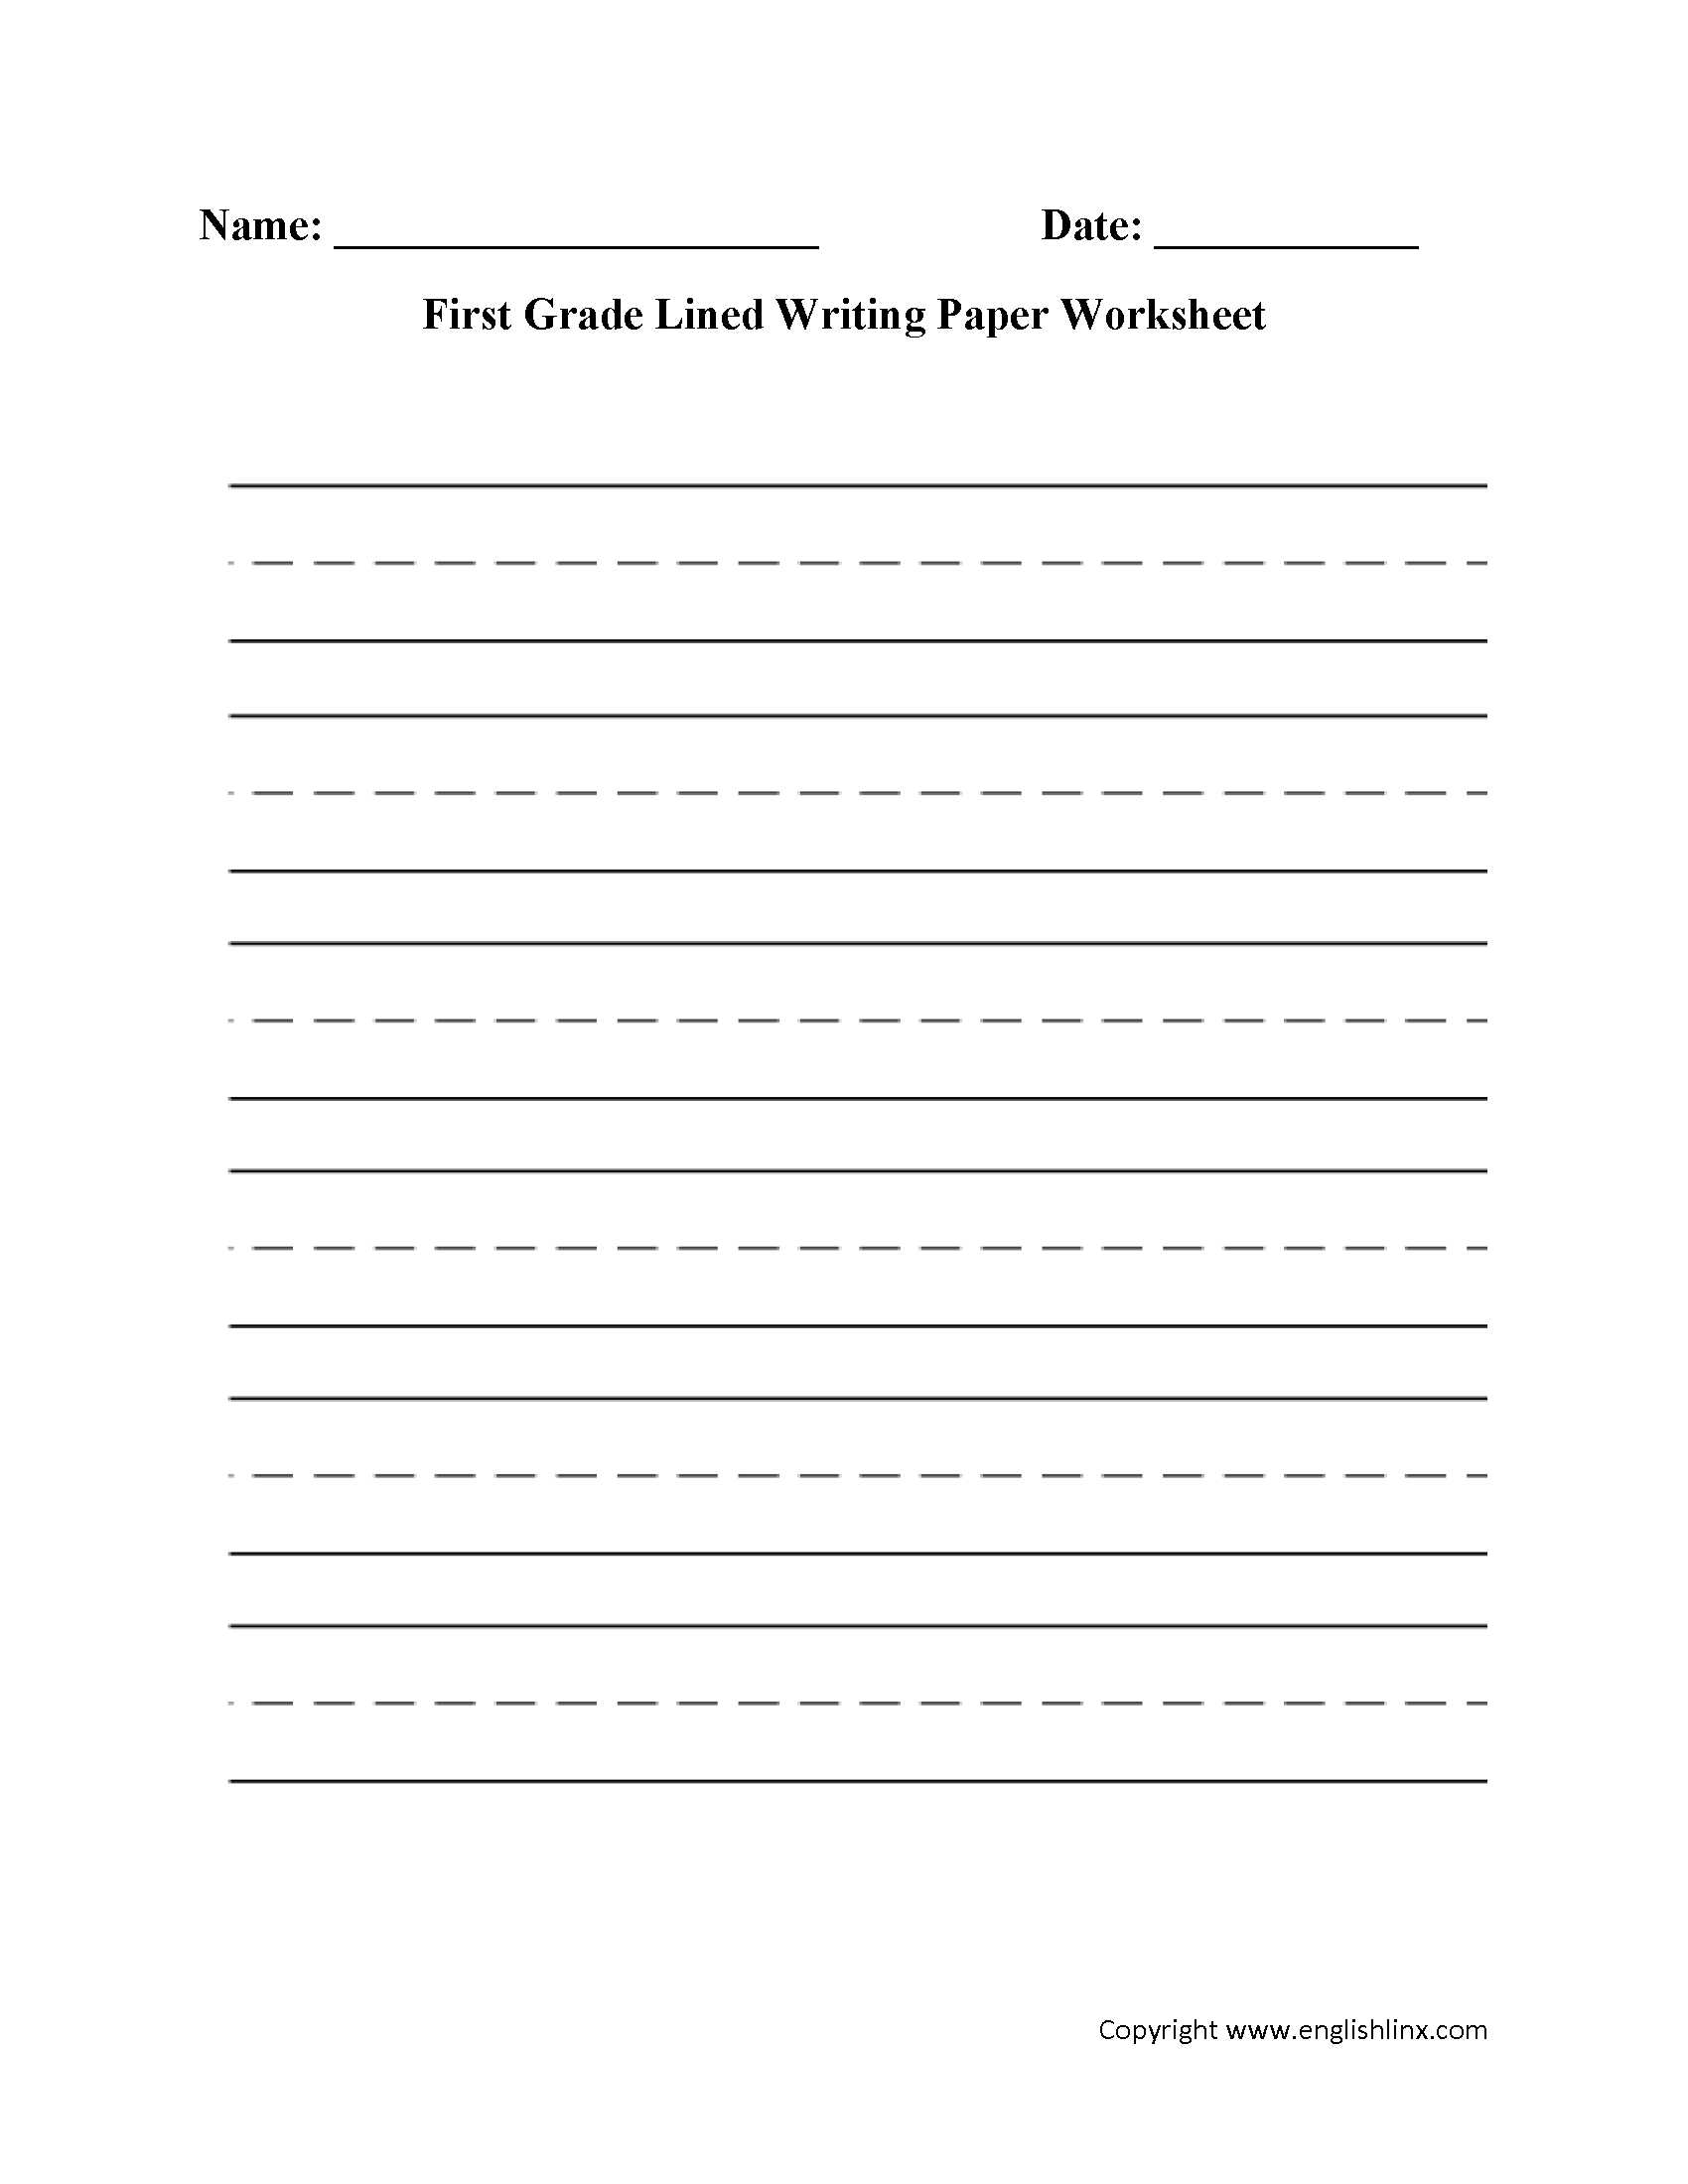 Writing Sentences Worksheets for 1st Grade together with Writing Worksheets